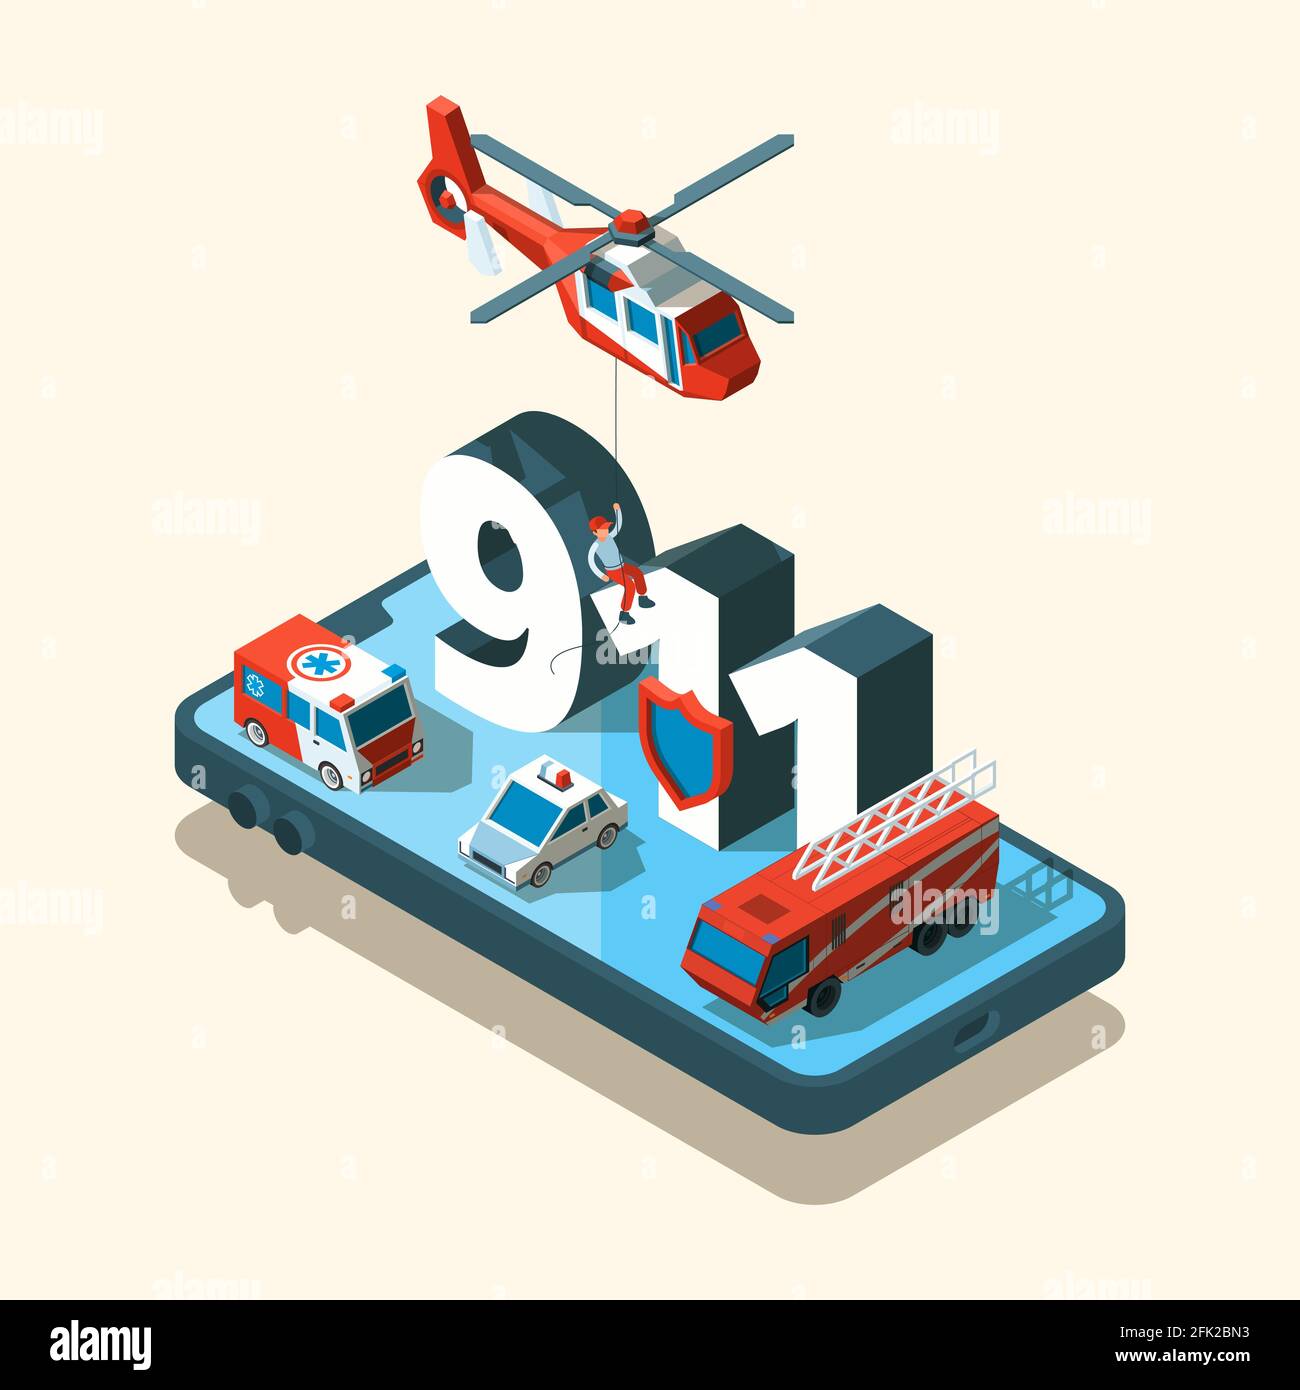 Emergency vehicles isometric. Safety urban transport 911 care call ambulance police vector car set Stock Vector